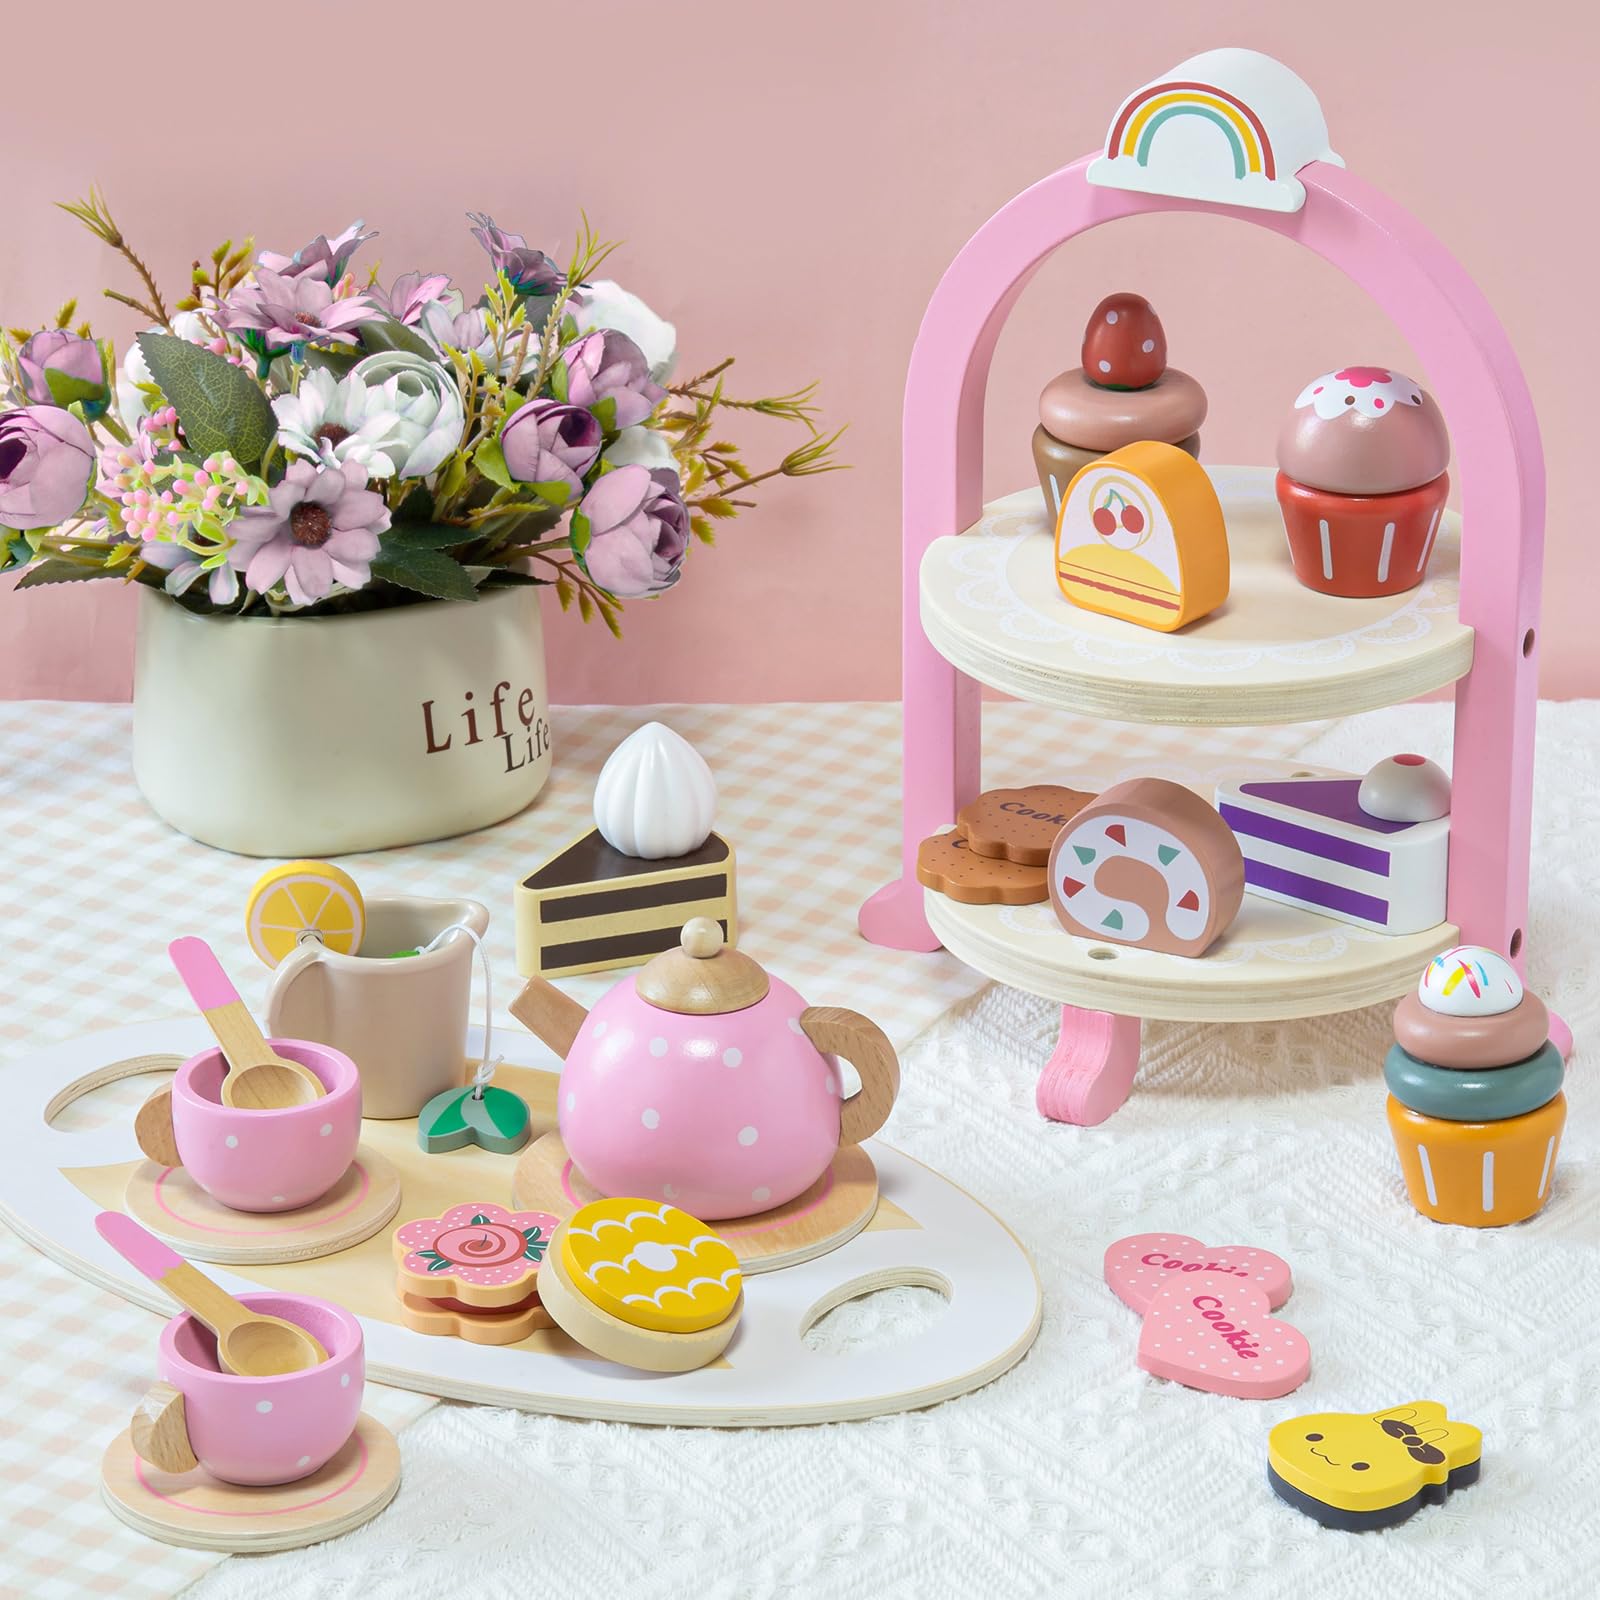 Atoylink Wooden Tea Party Set for Little Girls Toys Kids Play Kitchen Toddler Tea Set with Play Food & Cupcake Stand Pretend Play Wooden Toys for 2 3 4 5 6 Year Old Girl Christmas Birthday Gift